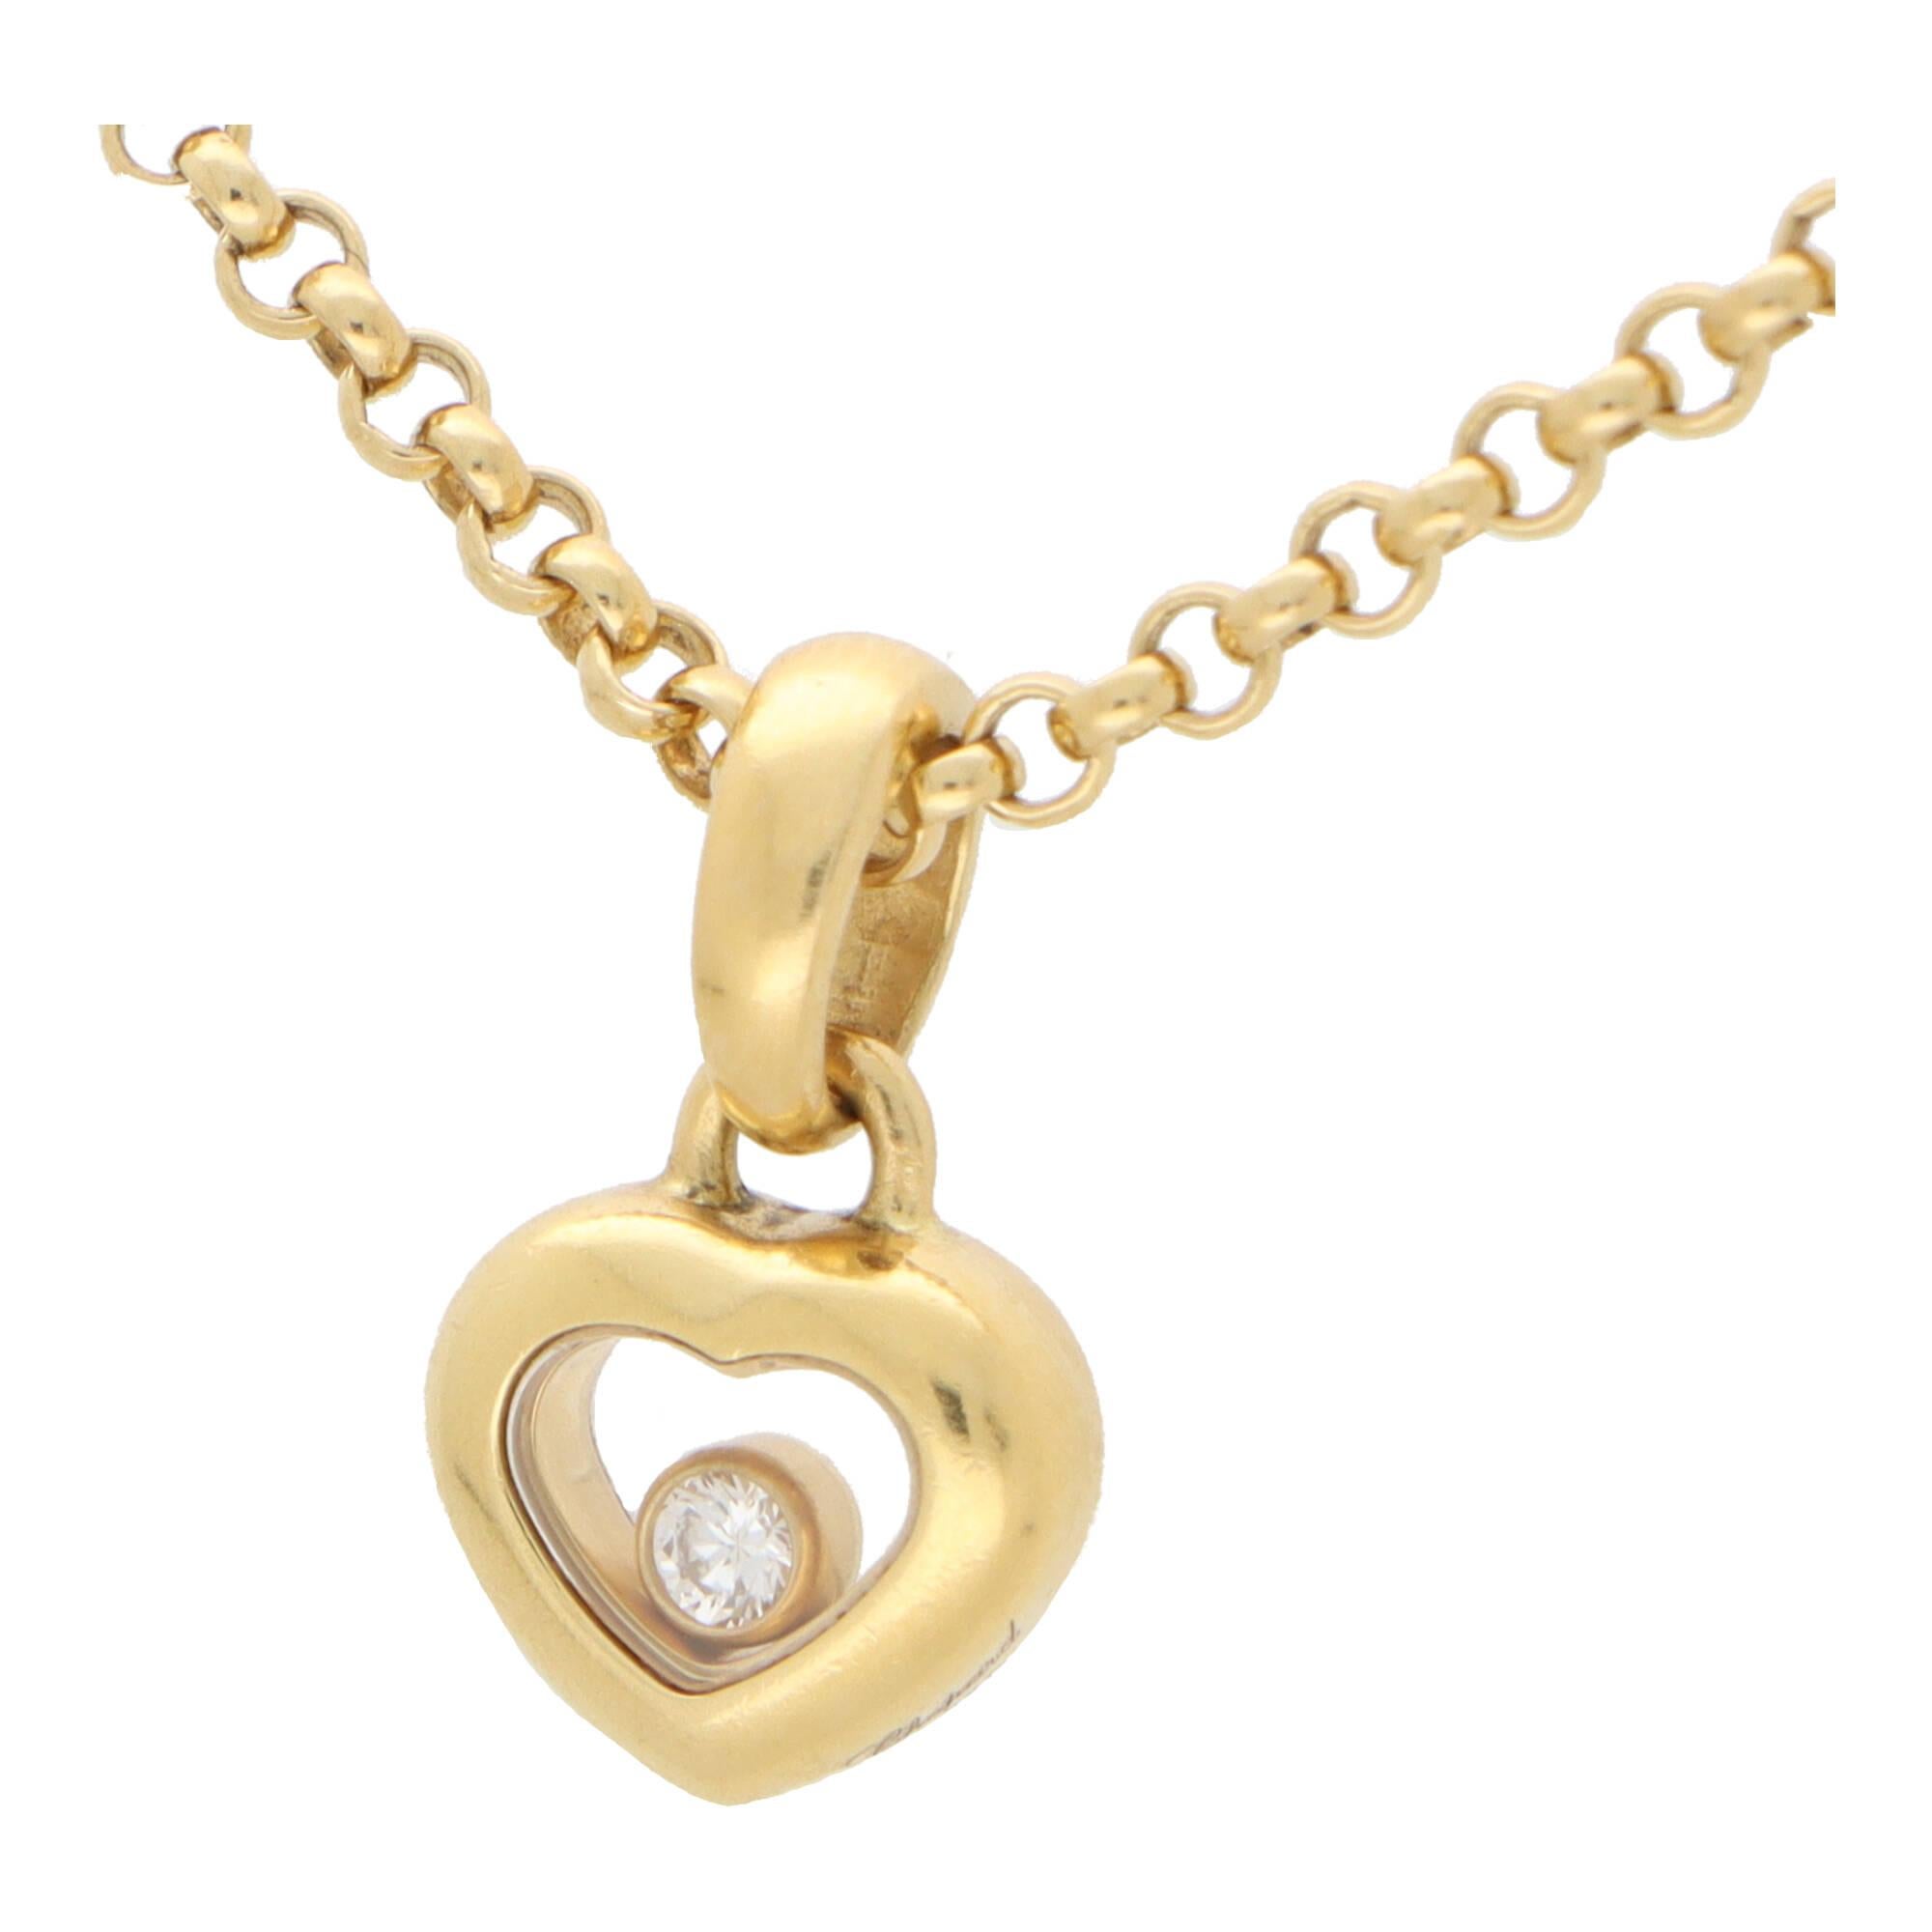 A stylish vintage Chopard ‘Happy Diamond’ pendant necklace set in 18k yellow gold.

The pendant is from the current Happy Diamond collection and features a open-heart motif, with a single floating rub over set diamond in the centre. The diamond